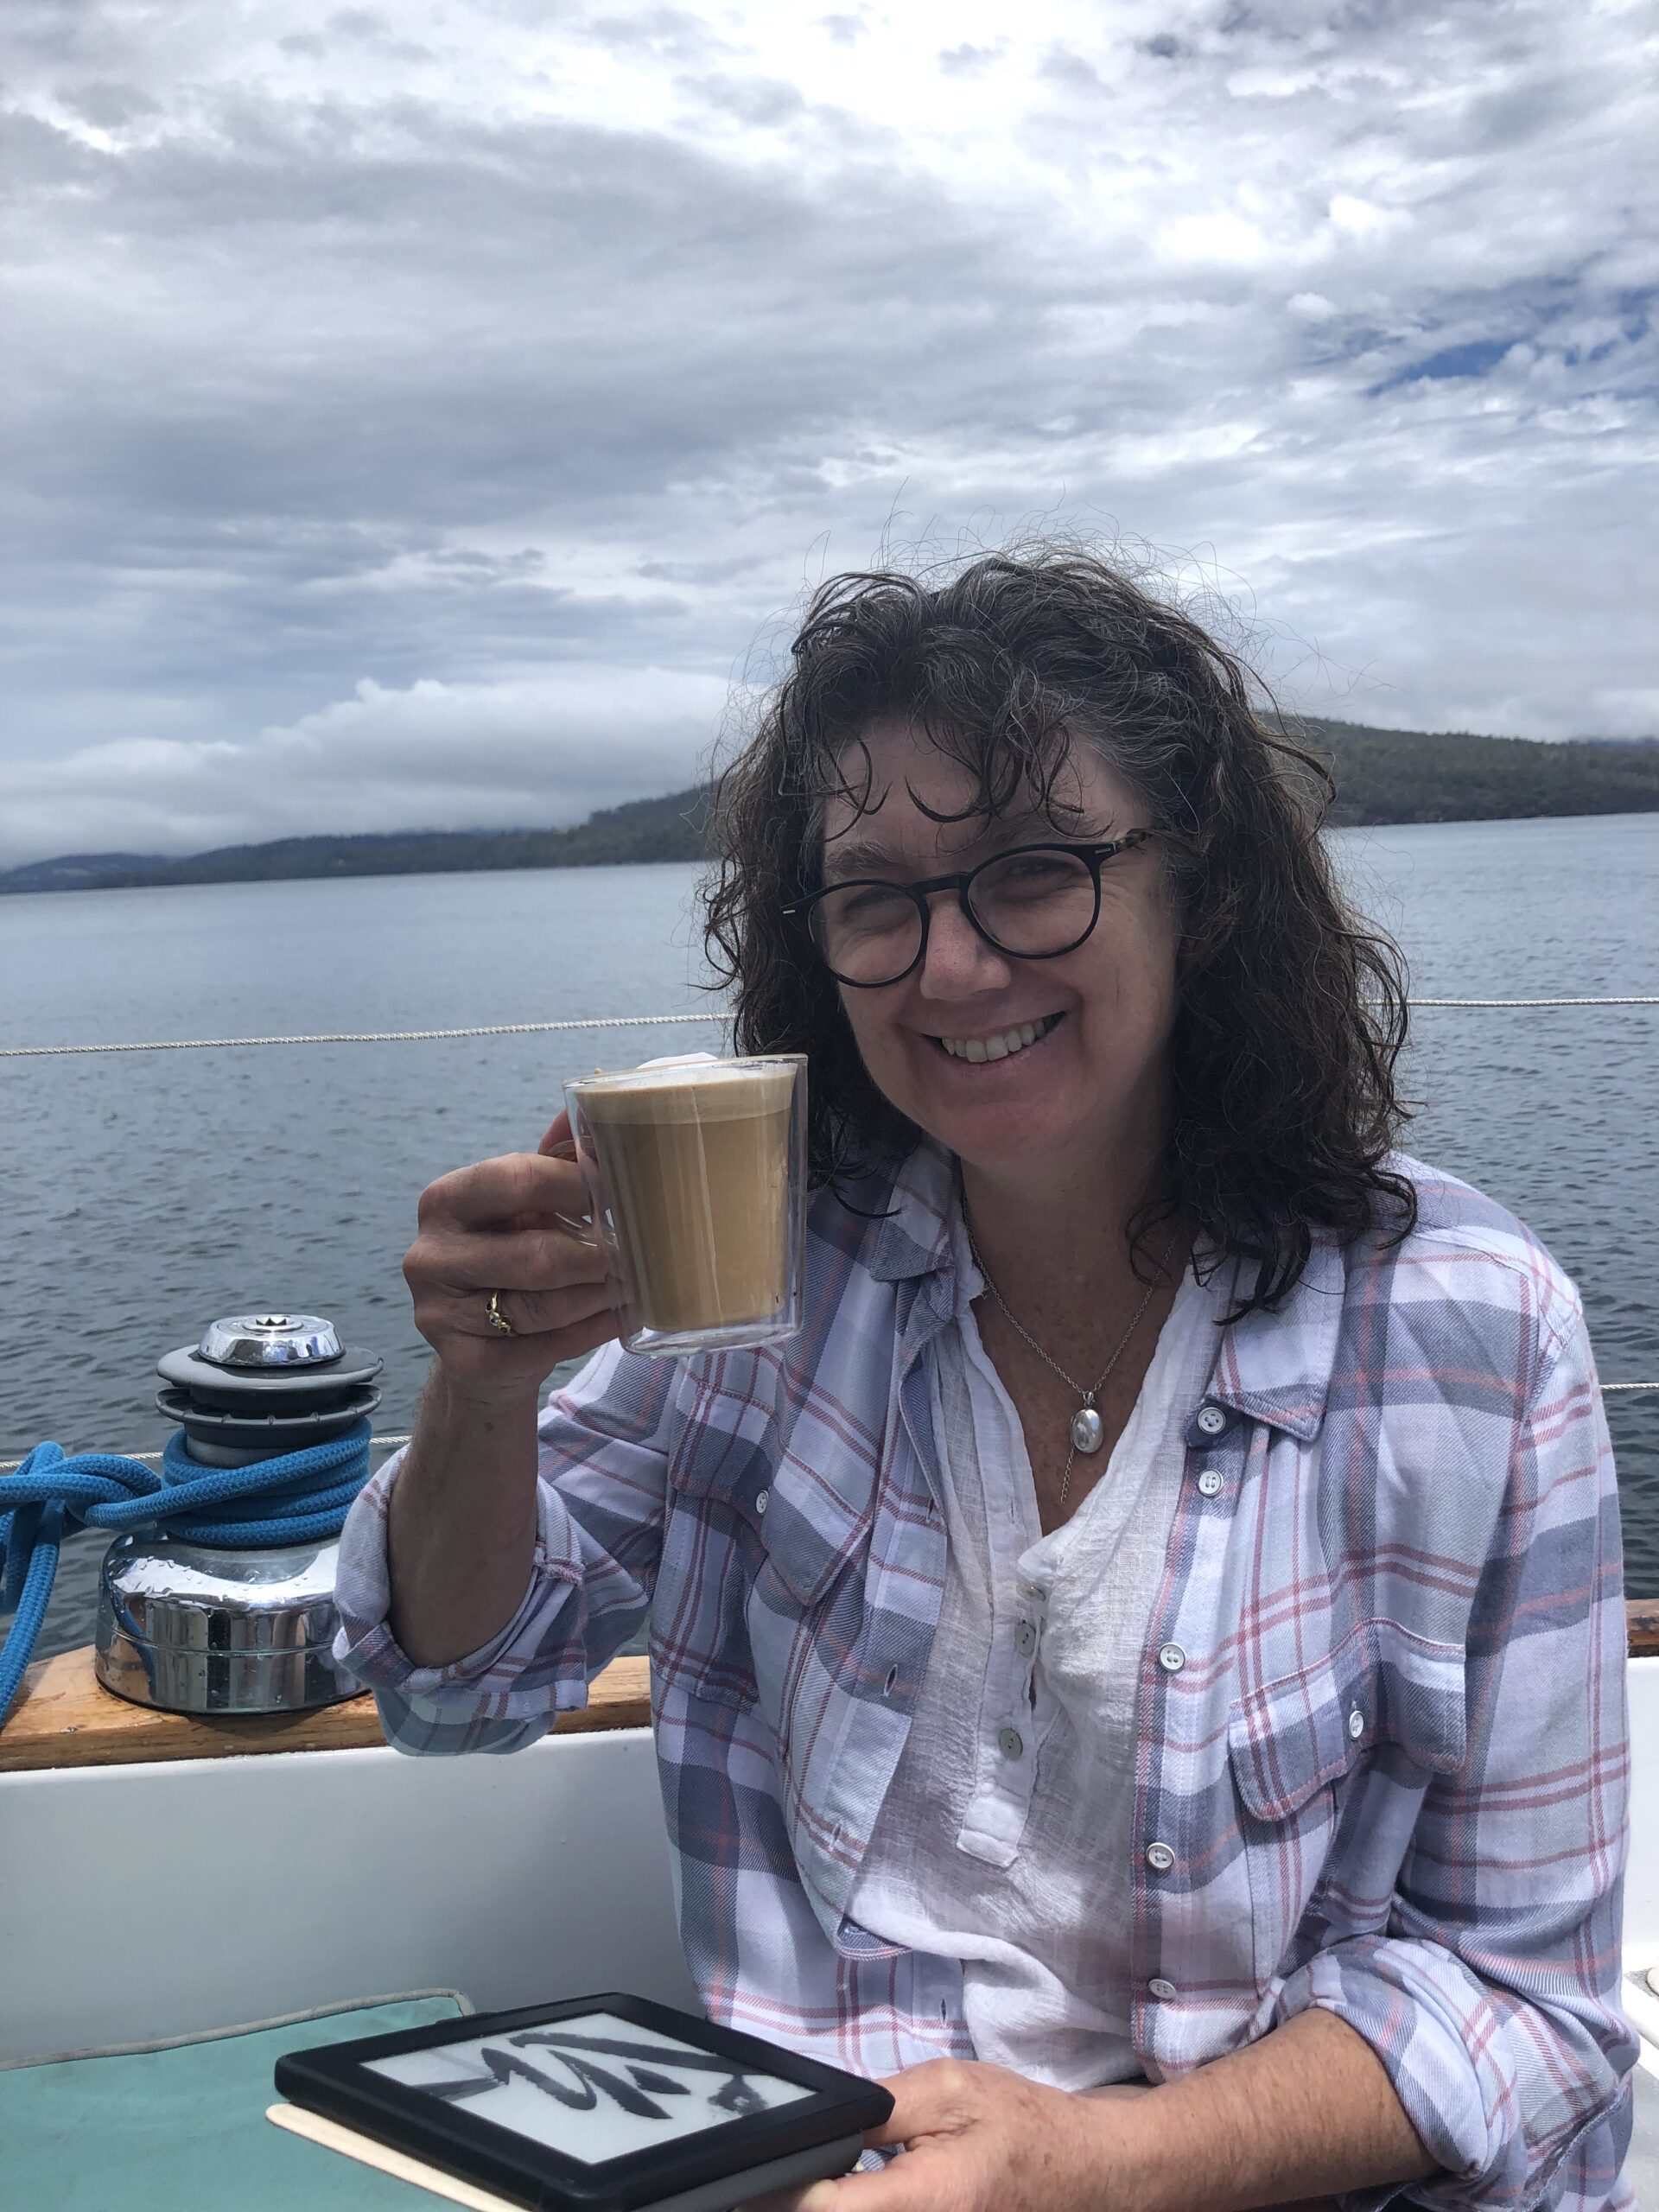 Christine is sitting on her boat drinking a coffee and reading her e-book. She has just had a swim, so her hair is wet and she is happy. The background is of smooth water and a hill in the background. The sky is cloudy.